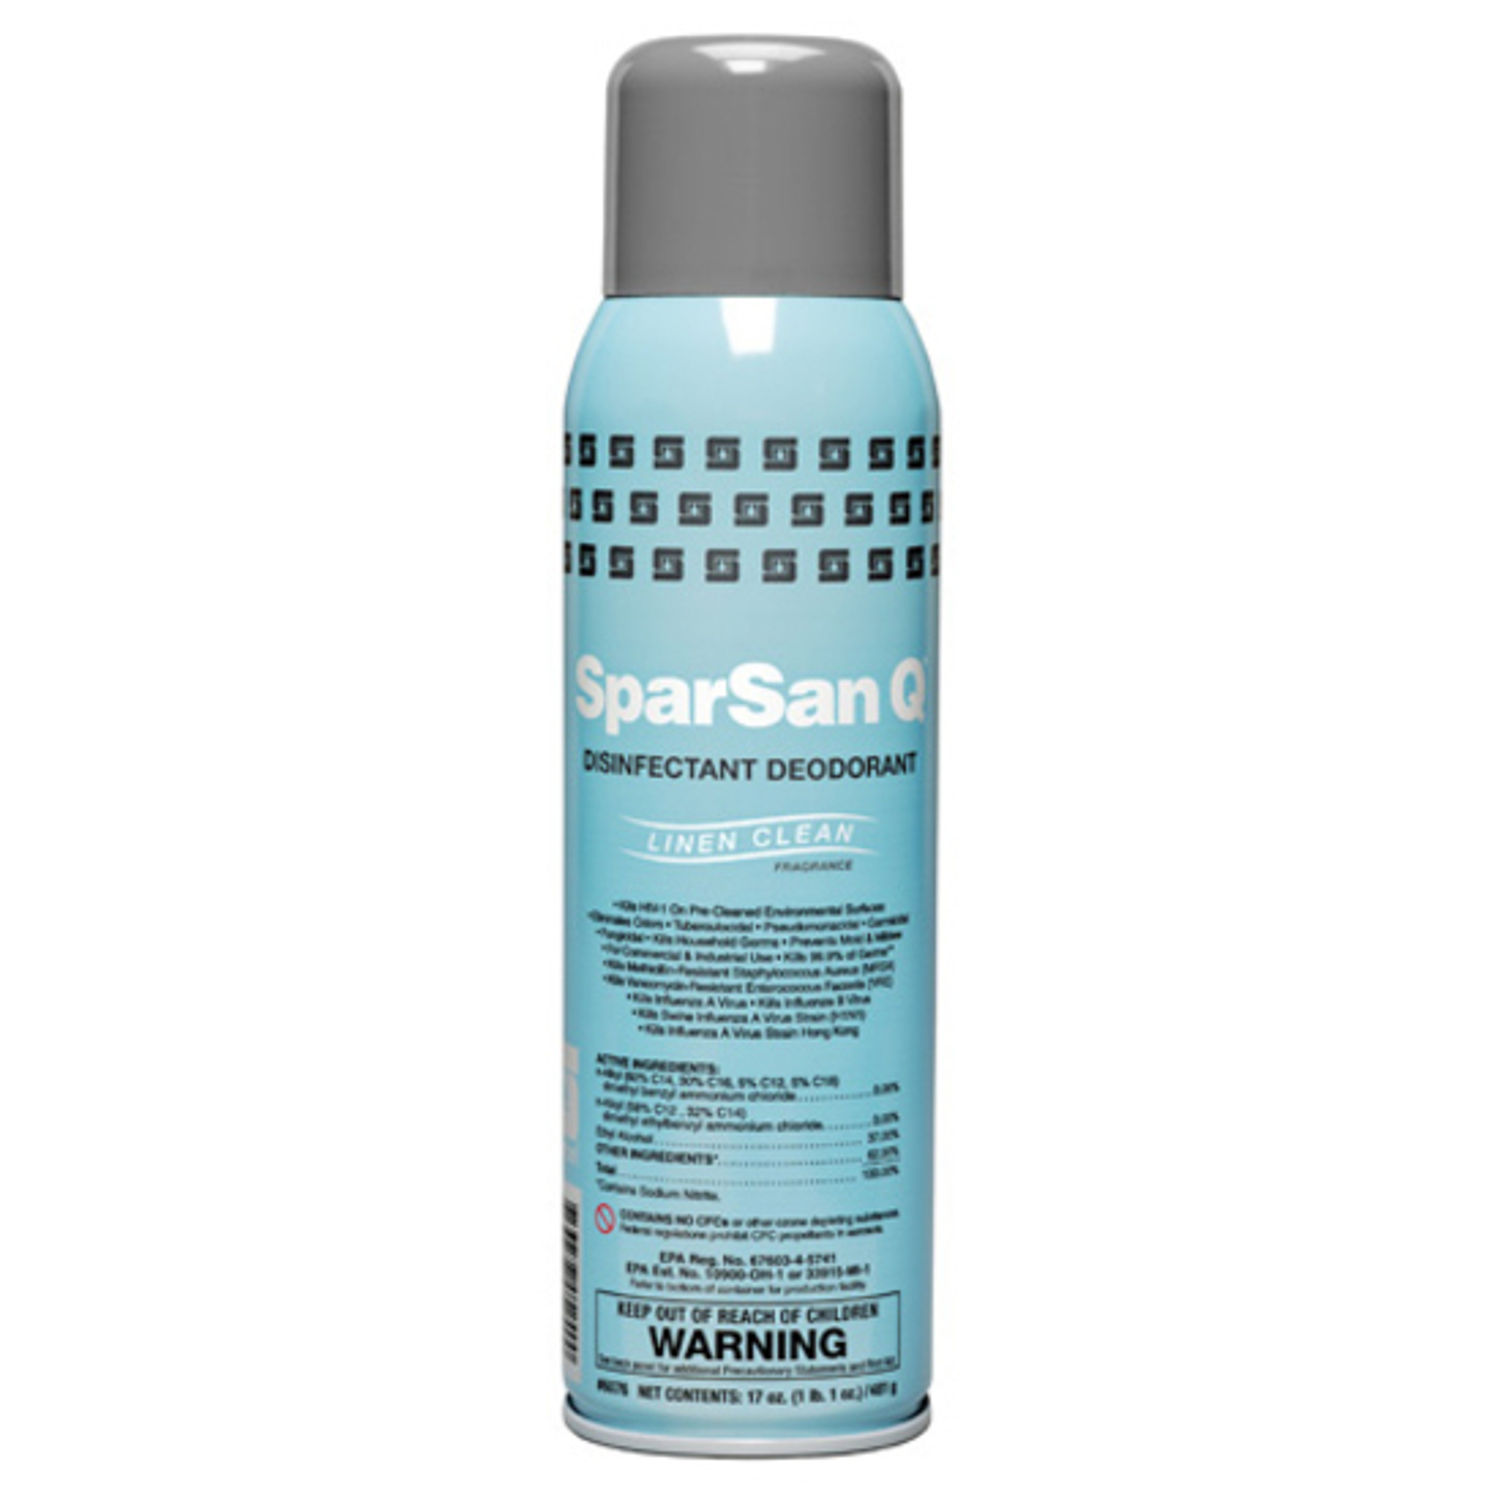 SparSan Q Disinfectant Deodorant Linen Clean Fragrance Ready-To-Use, 20 oz (1.25 lb), Clean Linen ScentCan, Clear